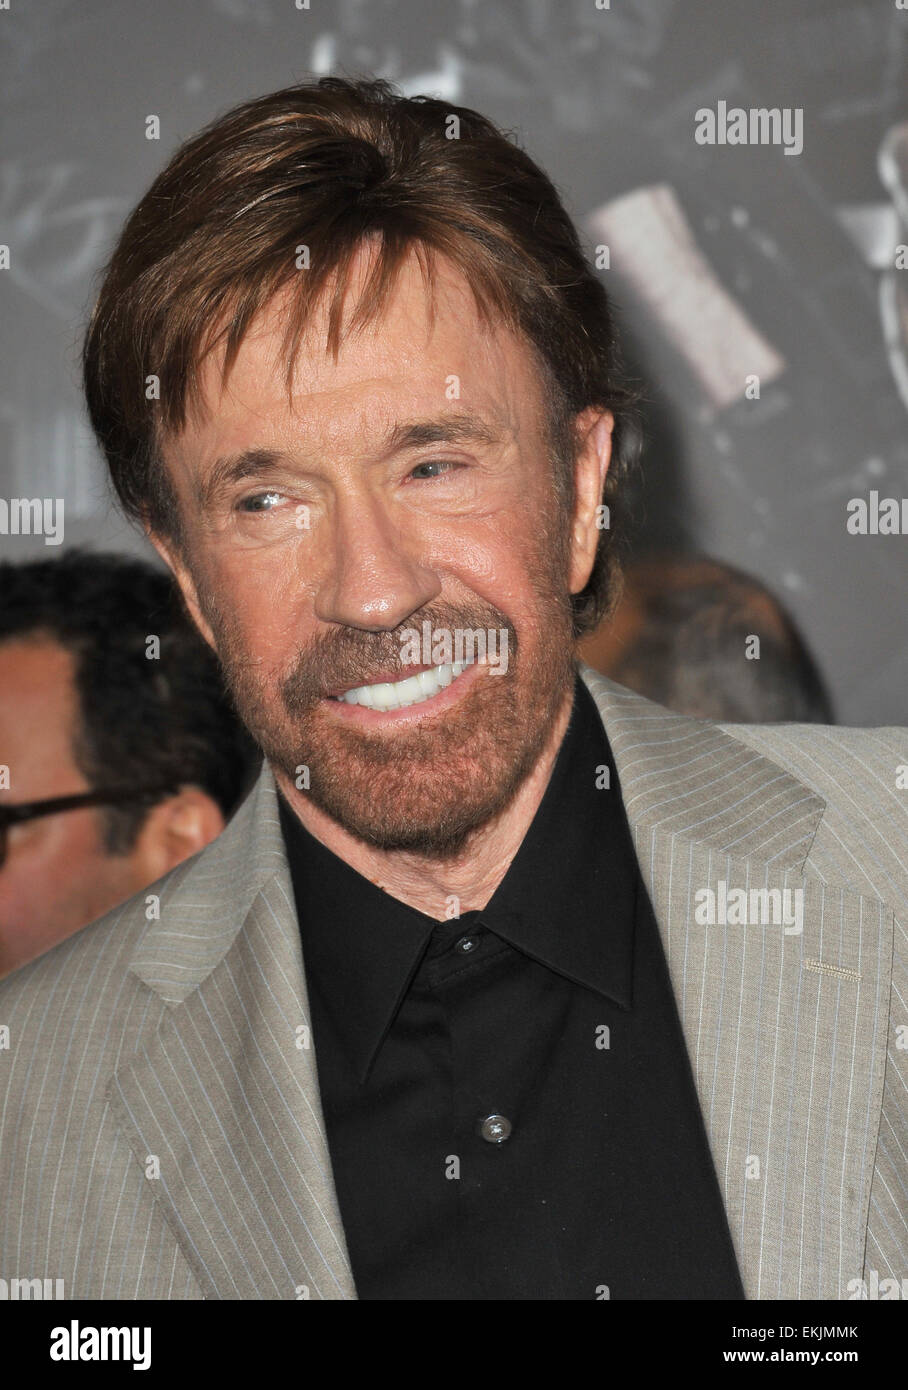 LOS ANGELES, CA - AUGUST 16, 2012: Chuck Norris at the Los Angeles premiere of his movie 'The Expendables 2' at Grauman's Chinese Theatre, Hollywood. Stock Photo